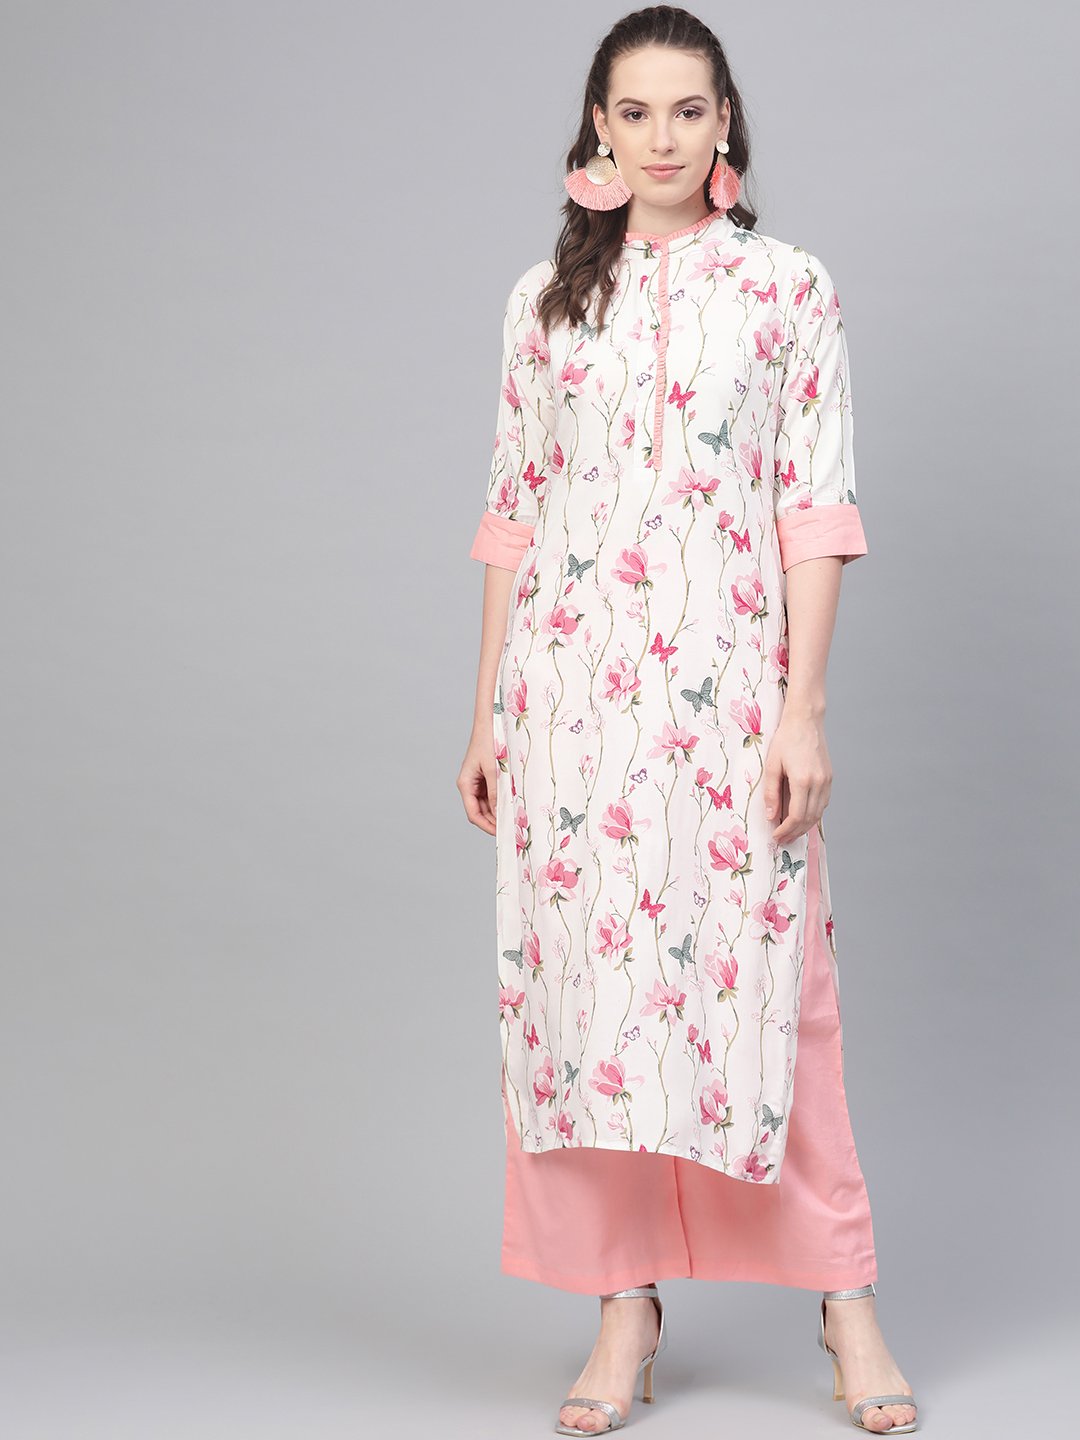 Women's Off White Multi Colored Floral Kurta With Collar And Placket Detailing With Solid Light Pink Pallazos - Nayo Clothing